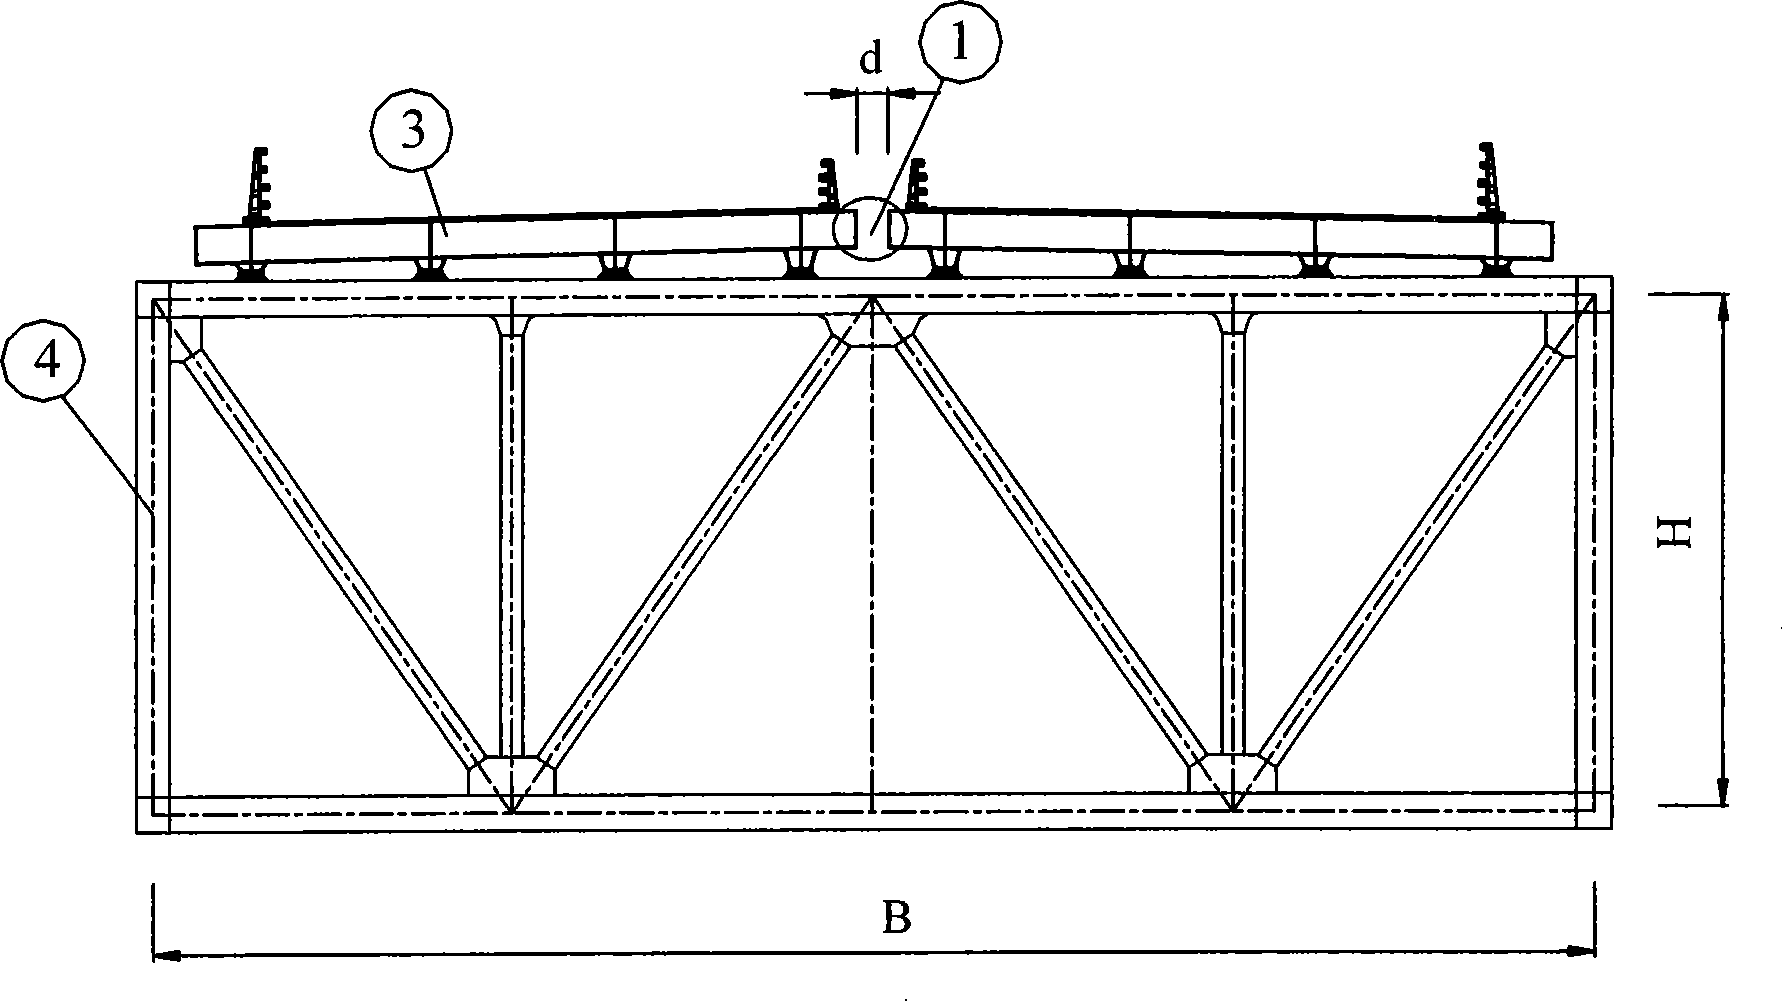 Pneumatic control device for improving flutter stability of steel trussed girder suspension bridge